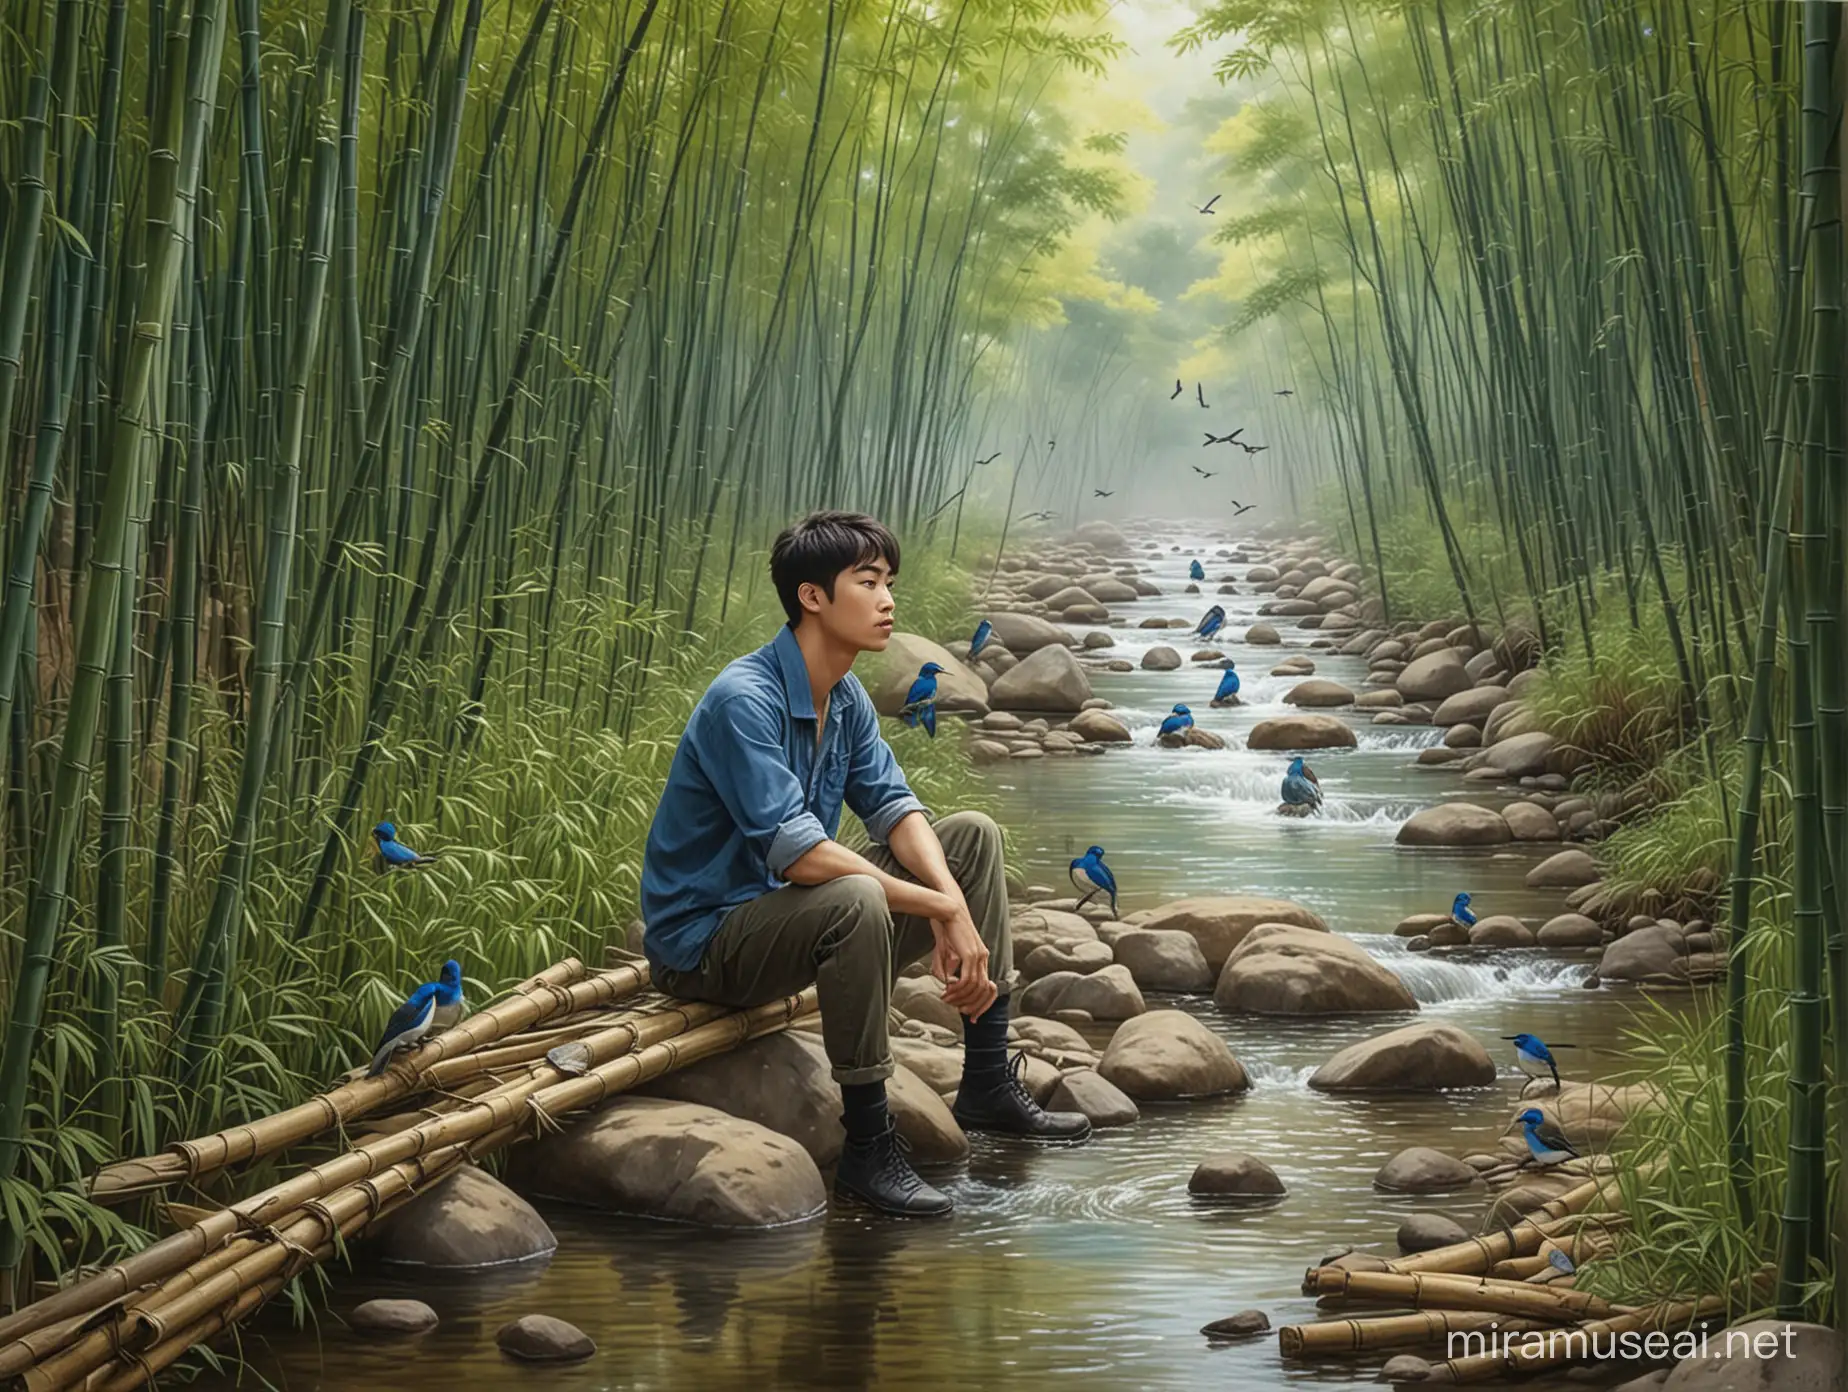 Korean Man Relaxing in Serene Bamboo Forest by Clear River with Hill Blue Flycatcher Birds